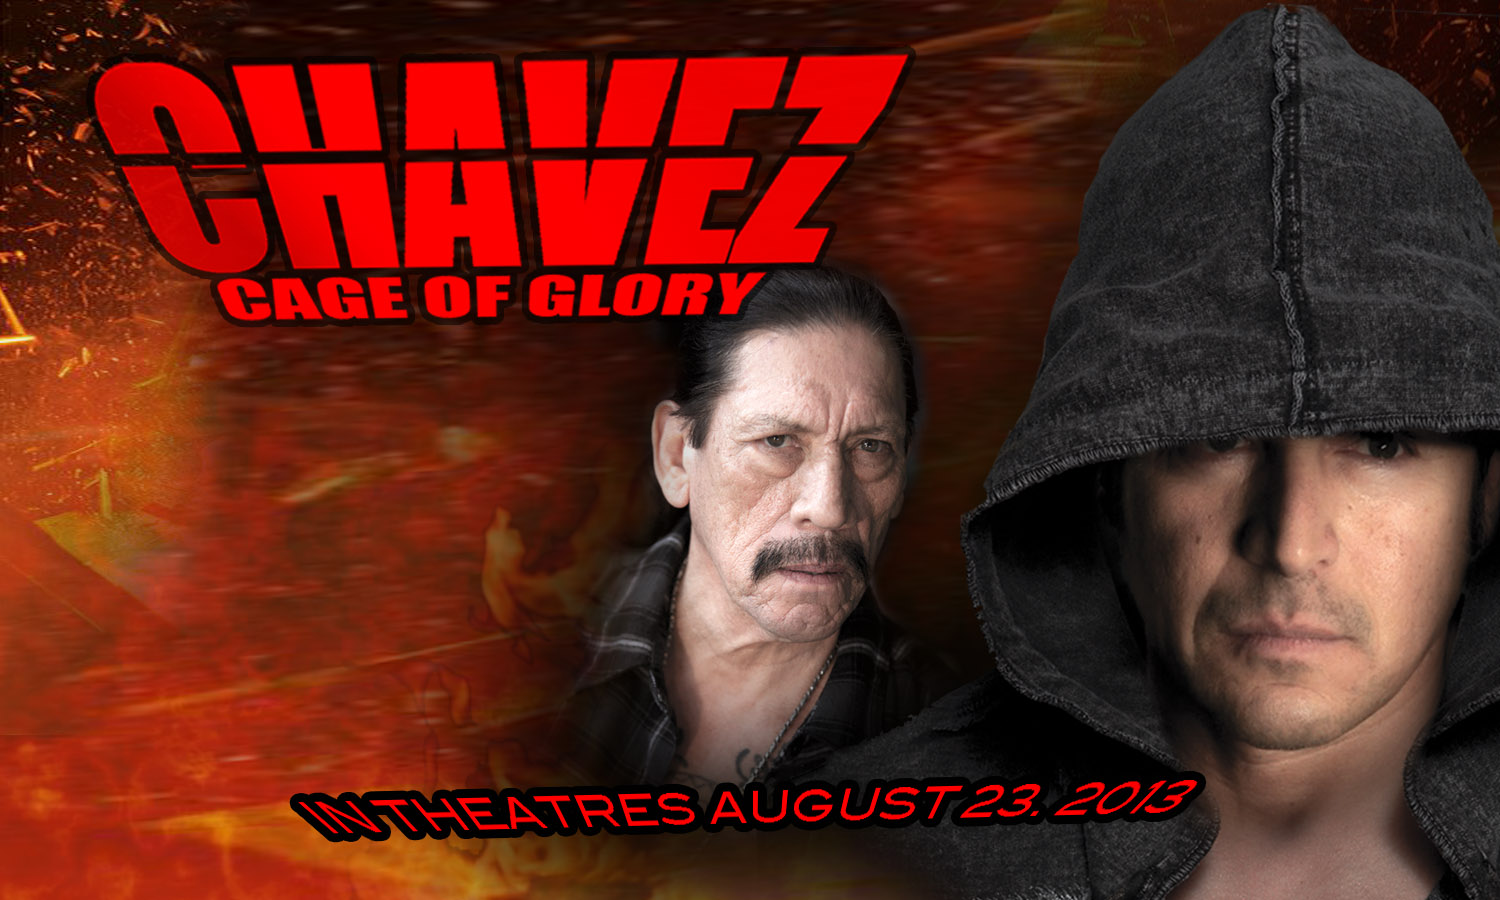 Hector Echavarria and Danny Trejo in Chavez Cage of Glory